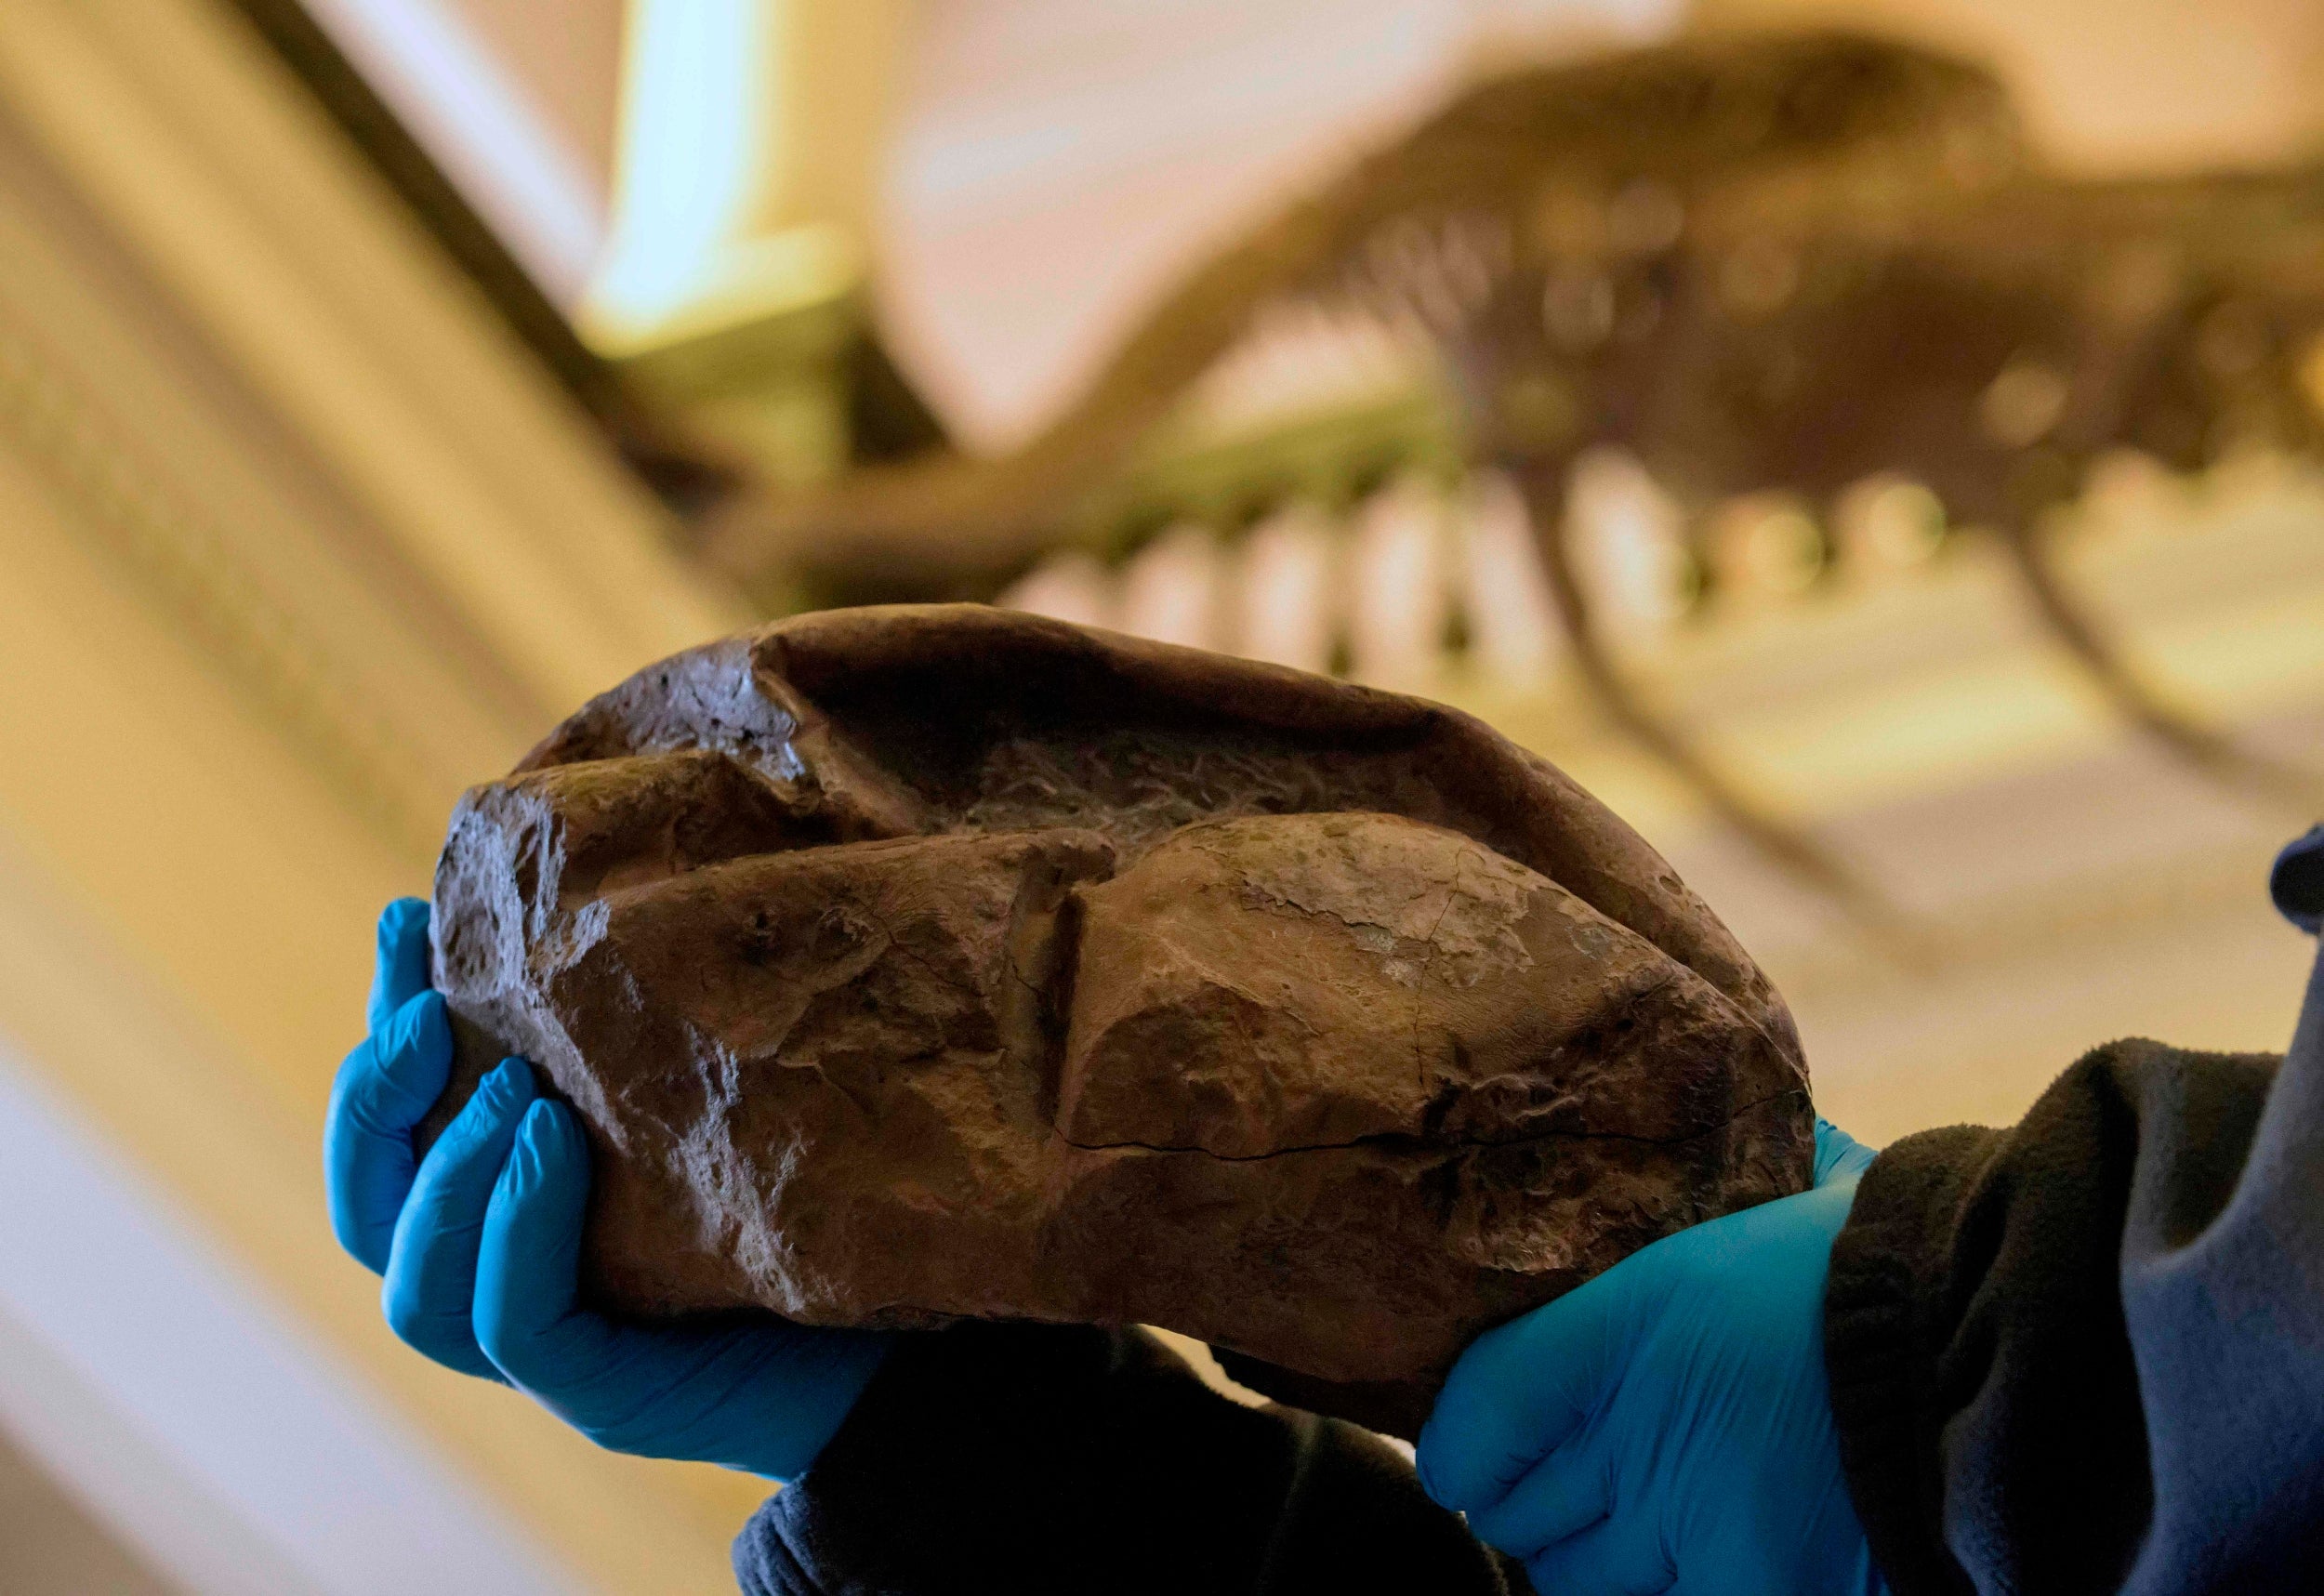 The fossil egg allegedly from a mosasaurus, a dinosaur species that lived in the Antarctic Peninsula 66 million-years ago